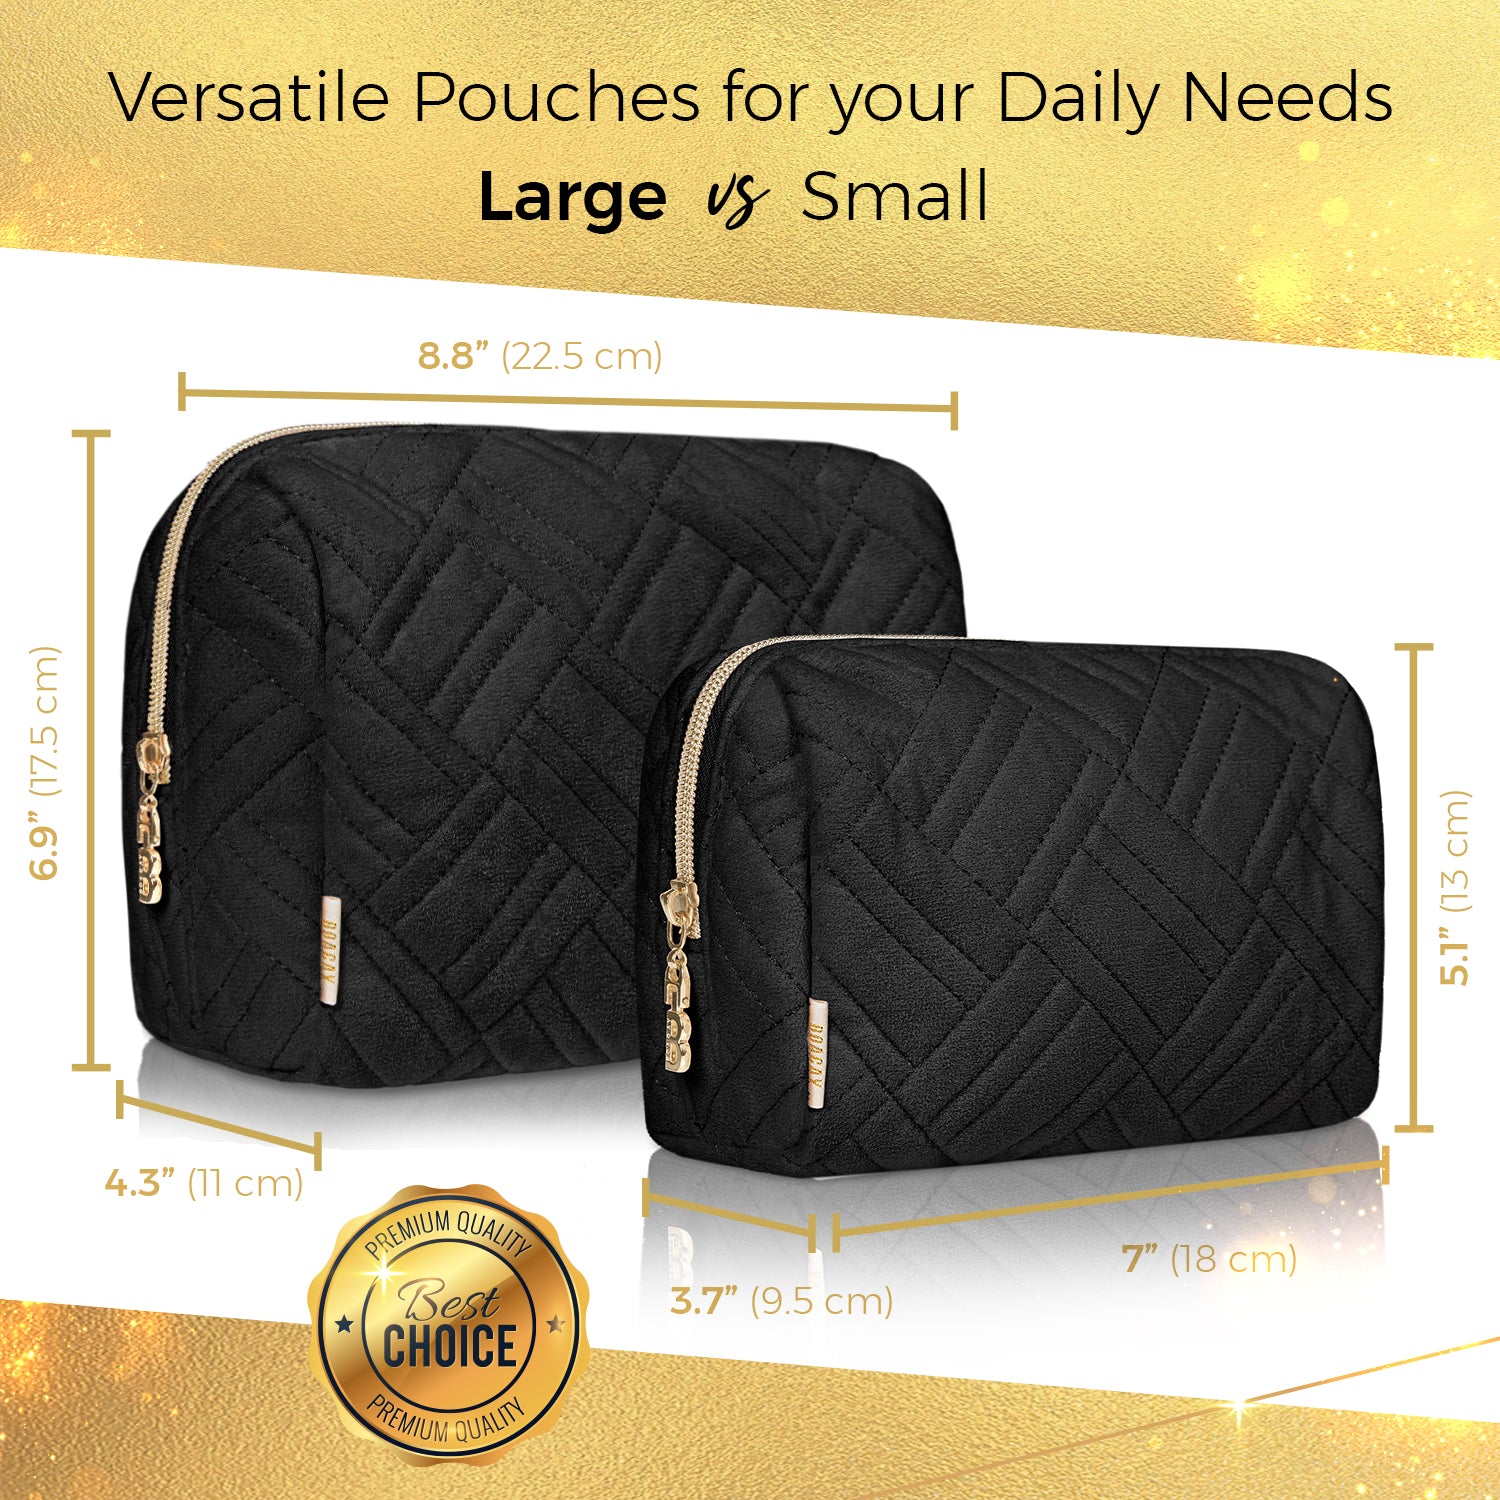 This Large Cosmetic Bag Is the Top New Release on